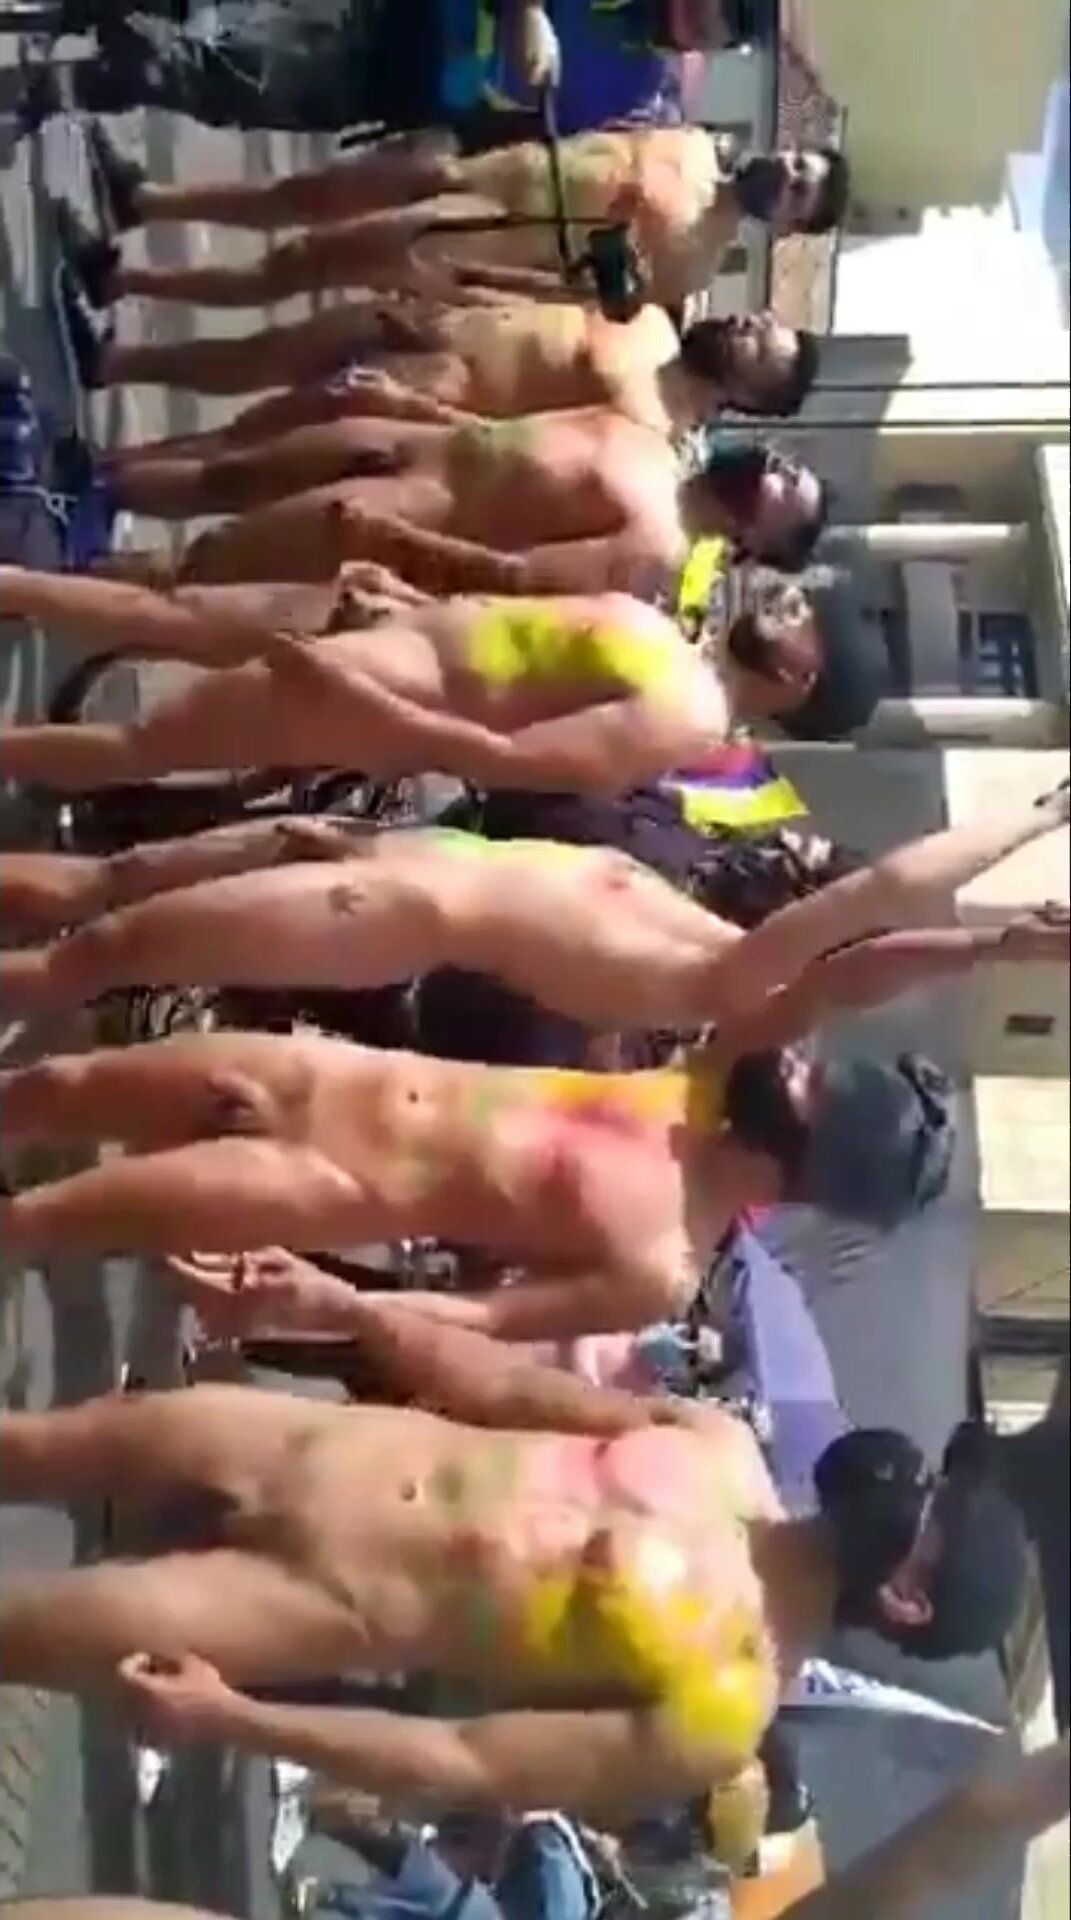 College students naked in public protest colombia